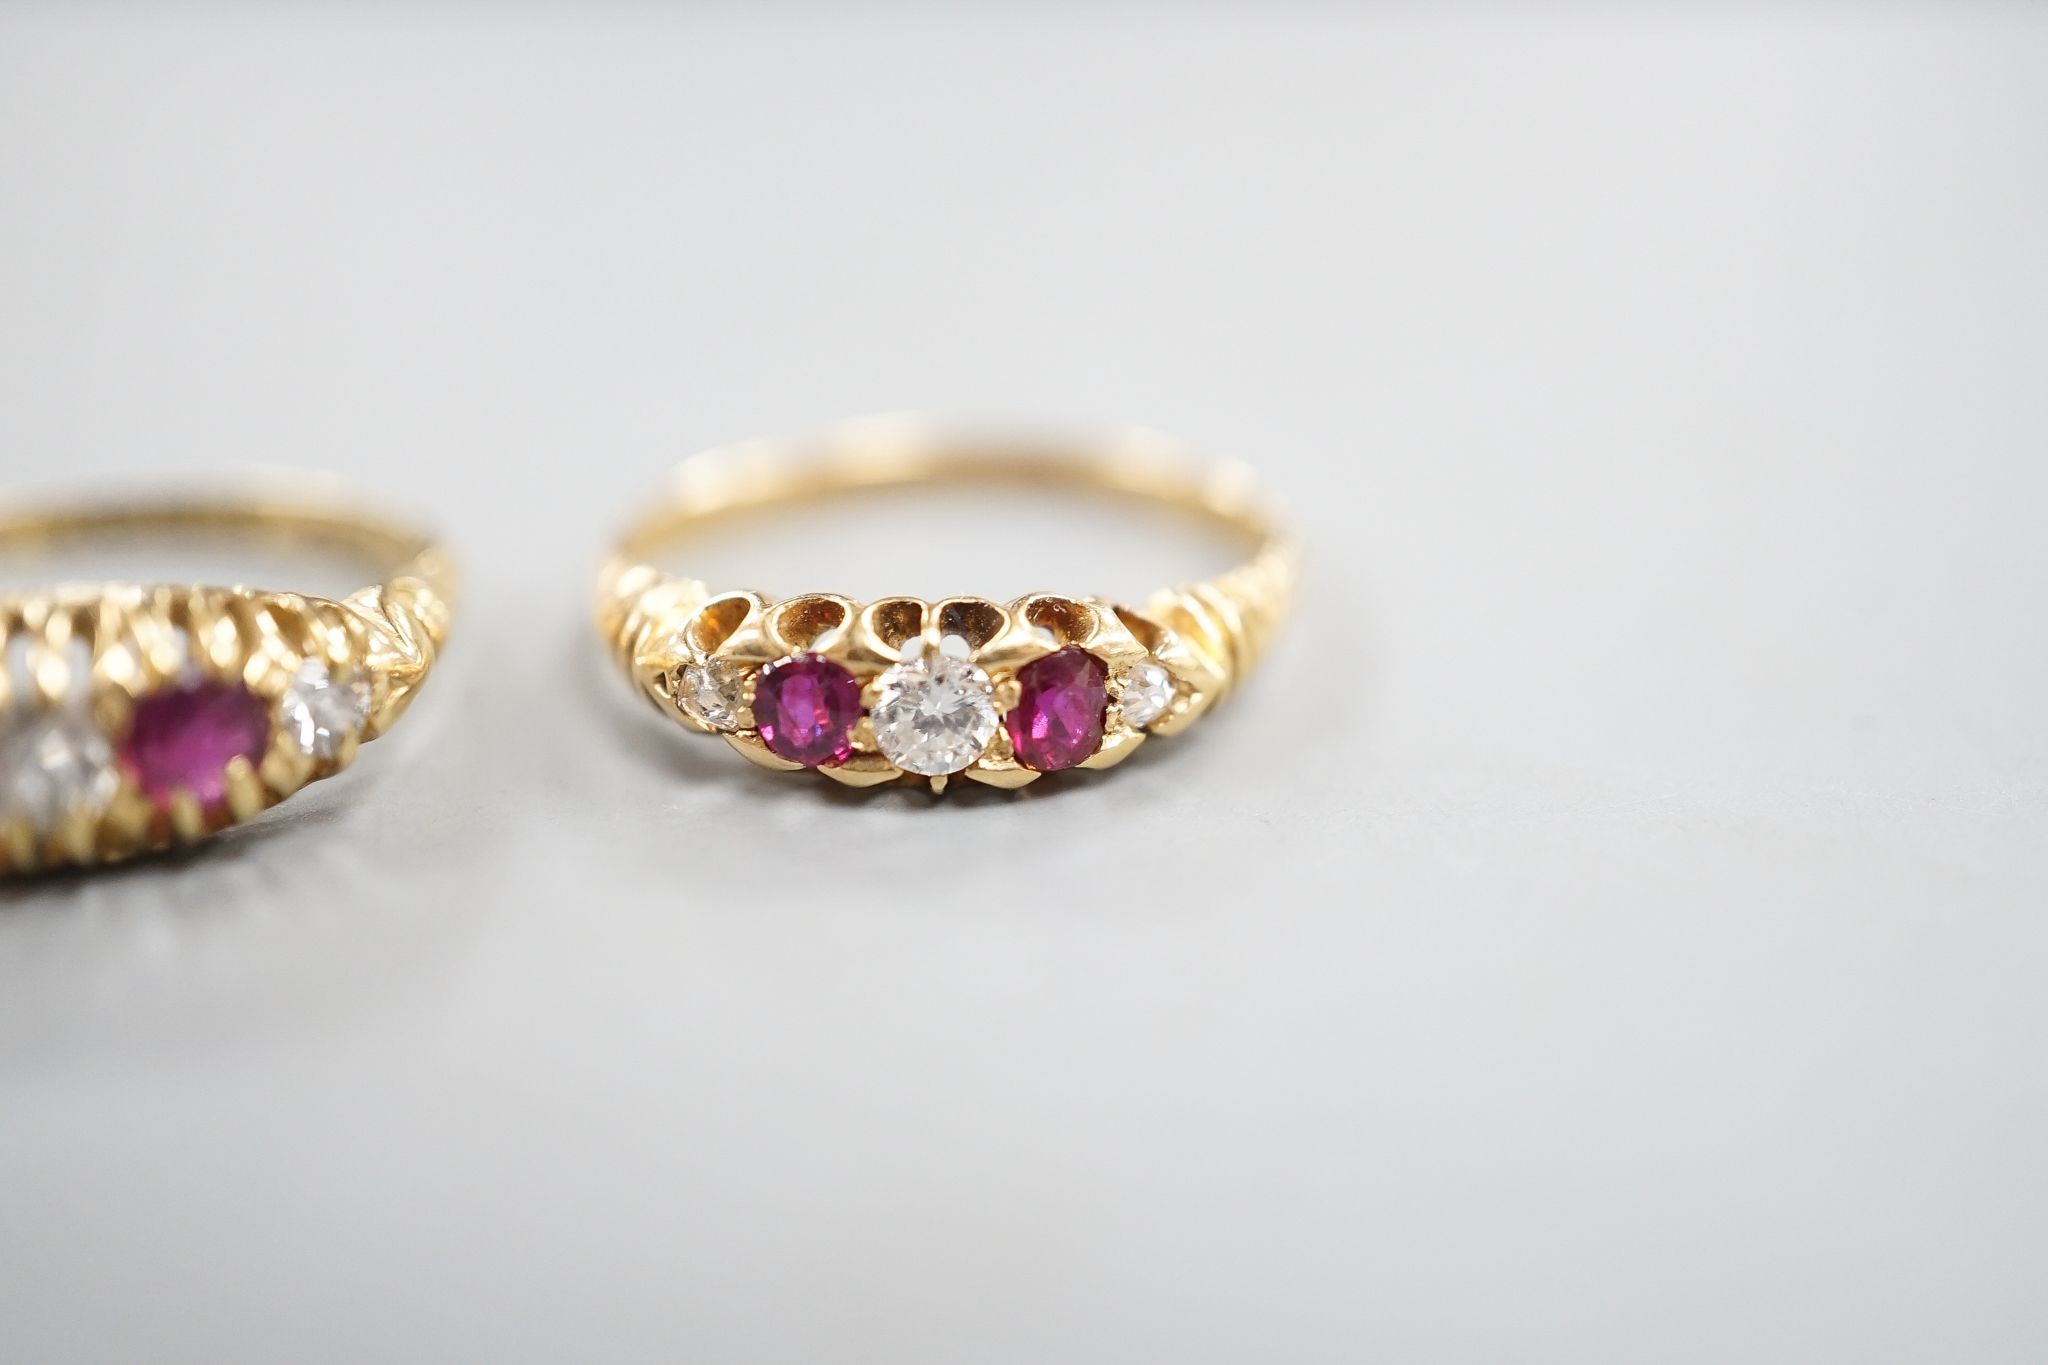 Two early 20th century 18ct gold, ruby and diamond five stone set half hoop rings, sizes m and P/Q, gross weight 5.1 grams.